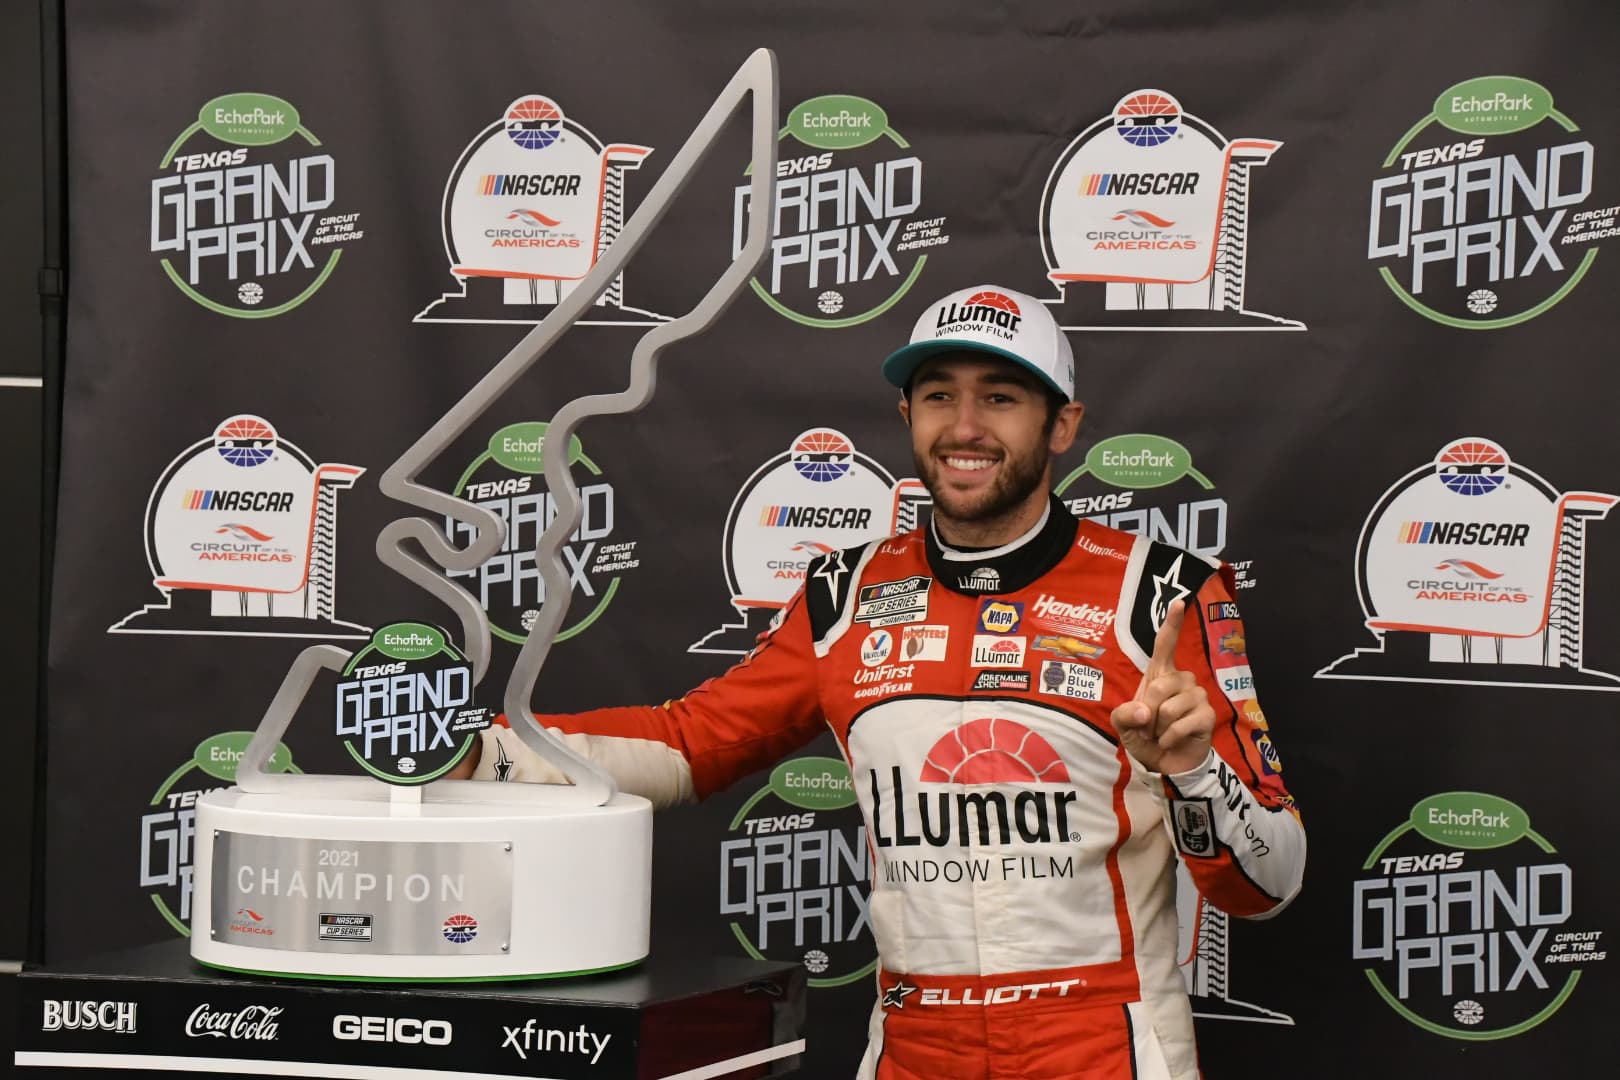 Overall, Chase Elliott emerges victorious in Sunday's EchoPark Texas Grand Prix at COTA. (Photo: Sean Folsom/The Podium Finish)